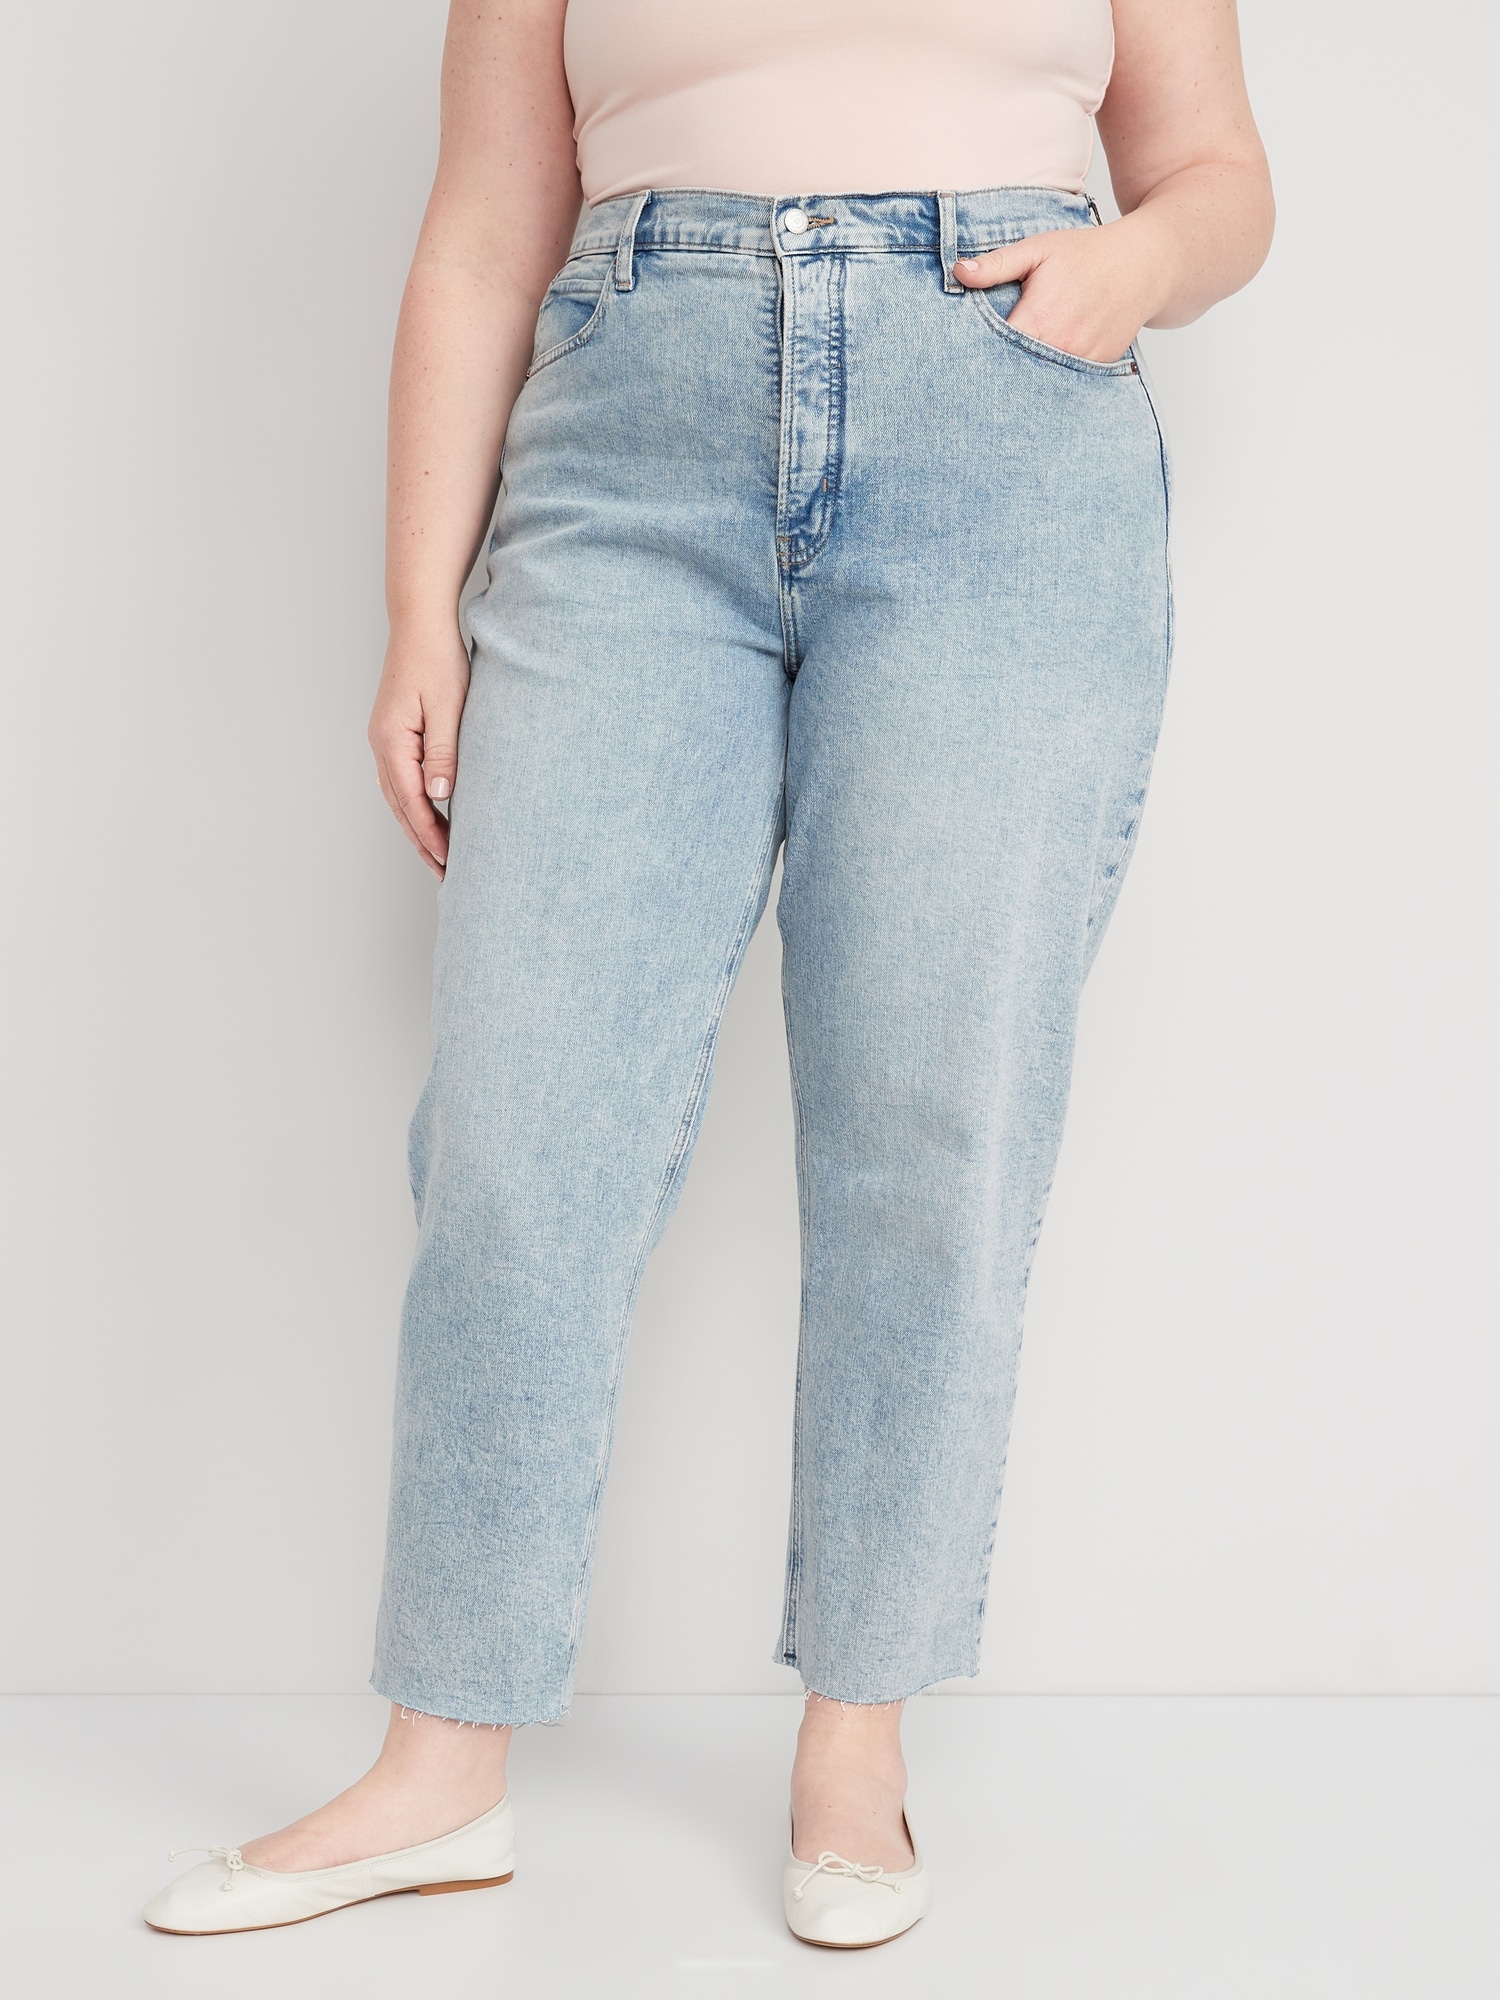 Old Navy Women's Curvy Extra High Waisted Sky Hi Wide Leg Jeans